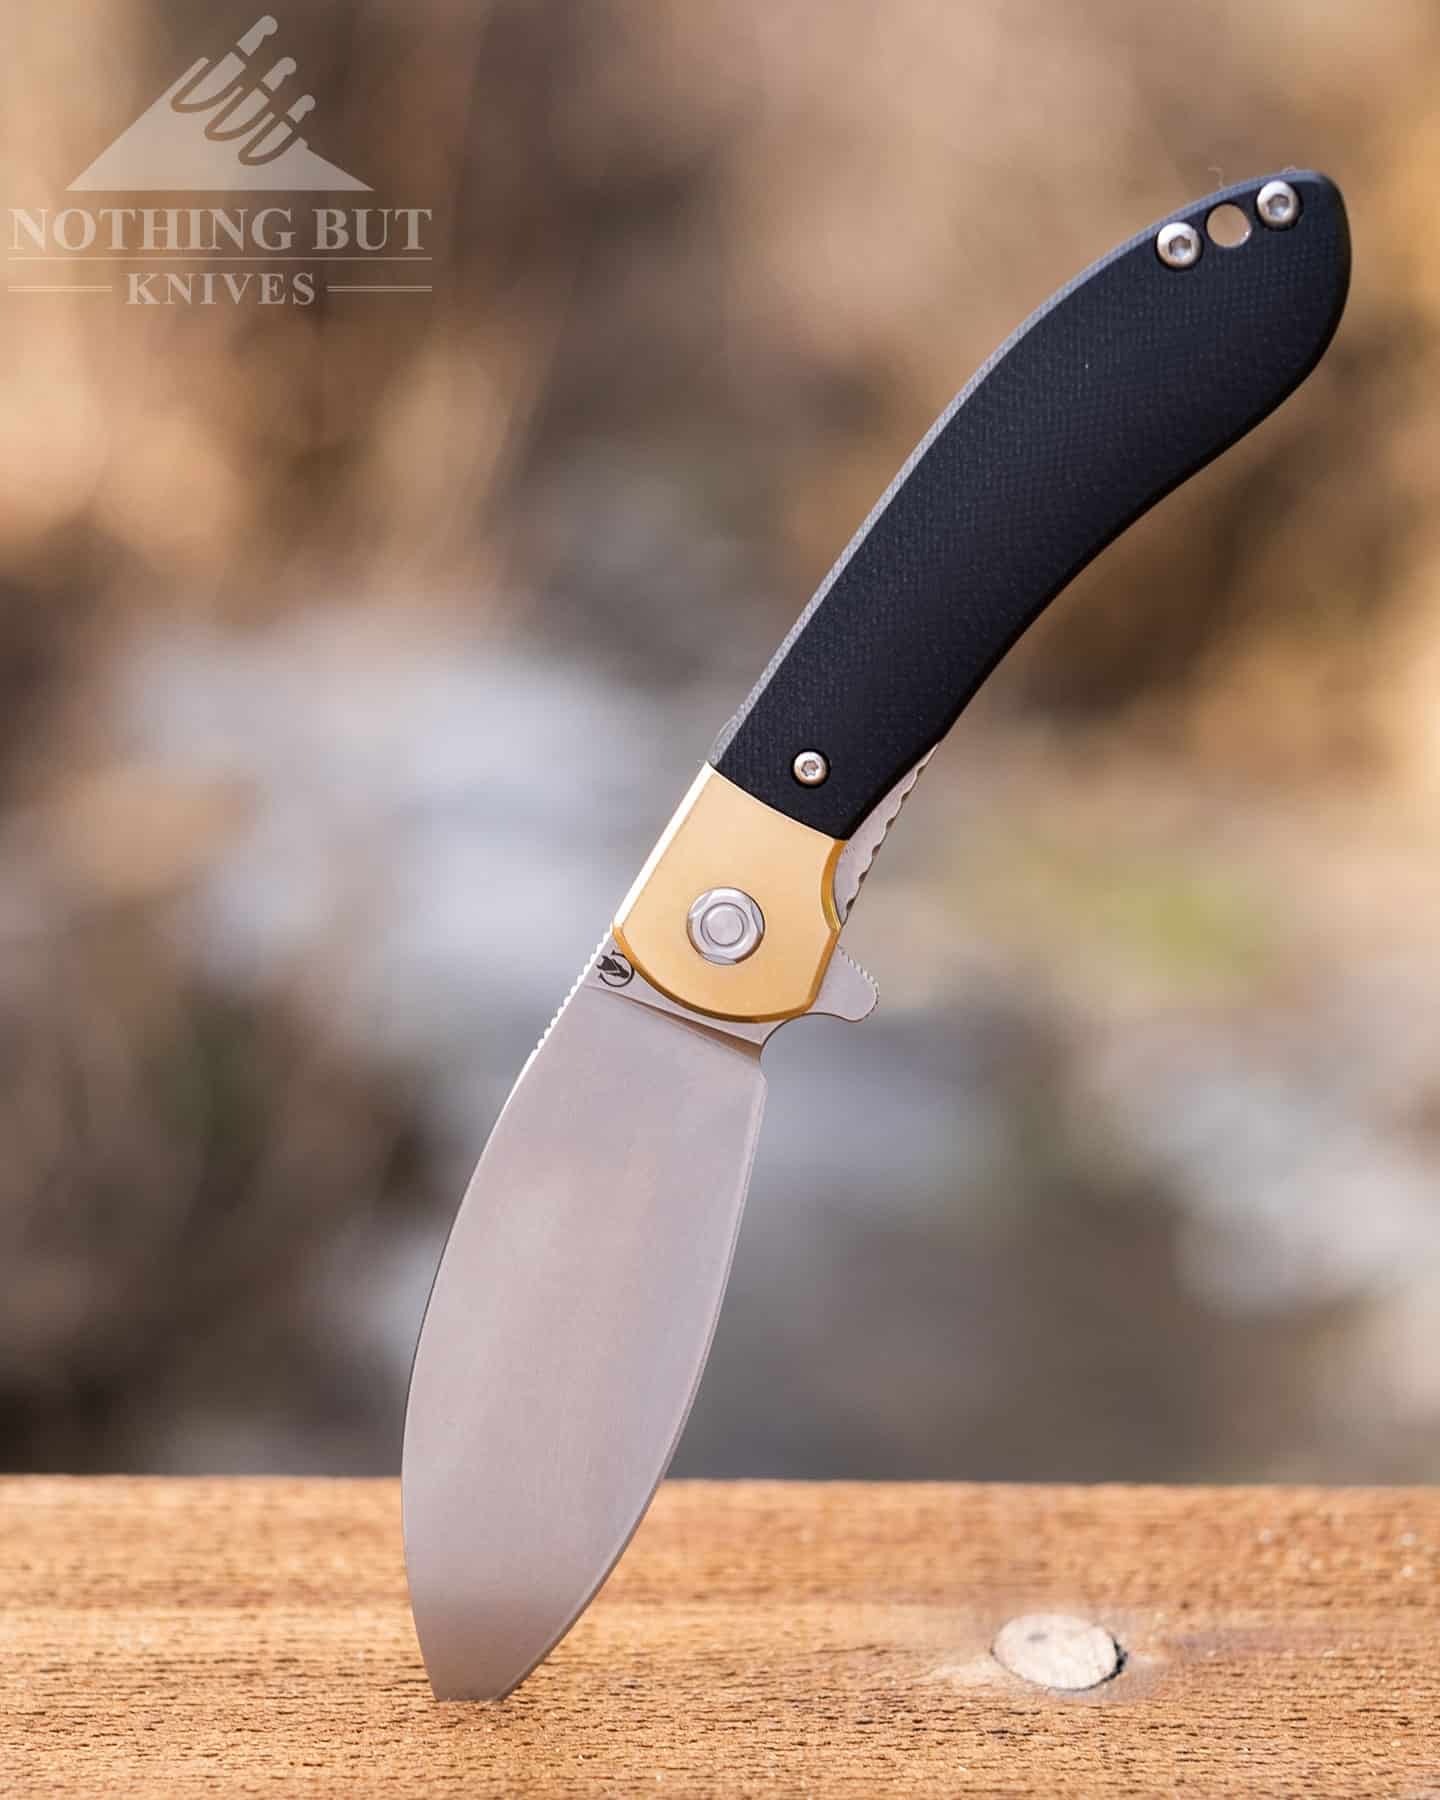 Vosteed Nightshade Knife Review